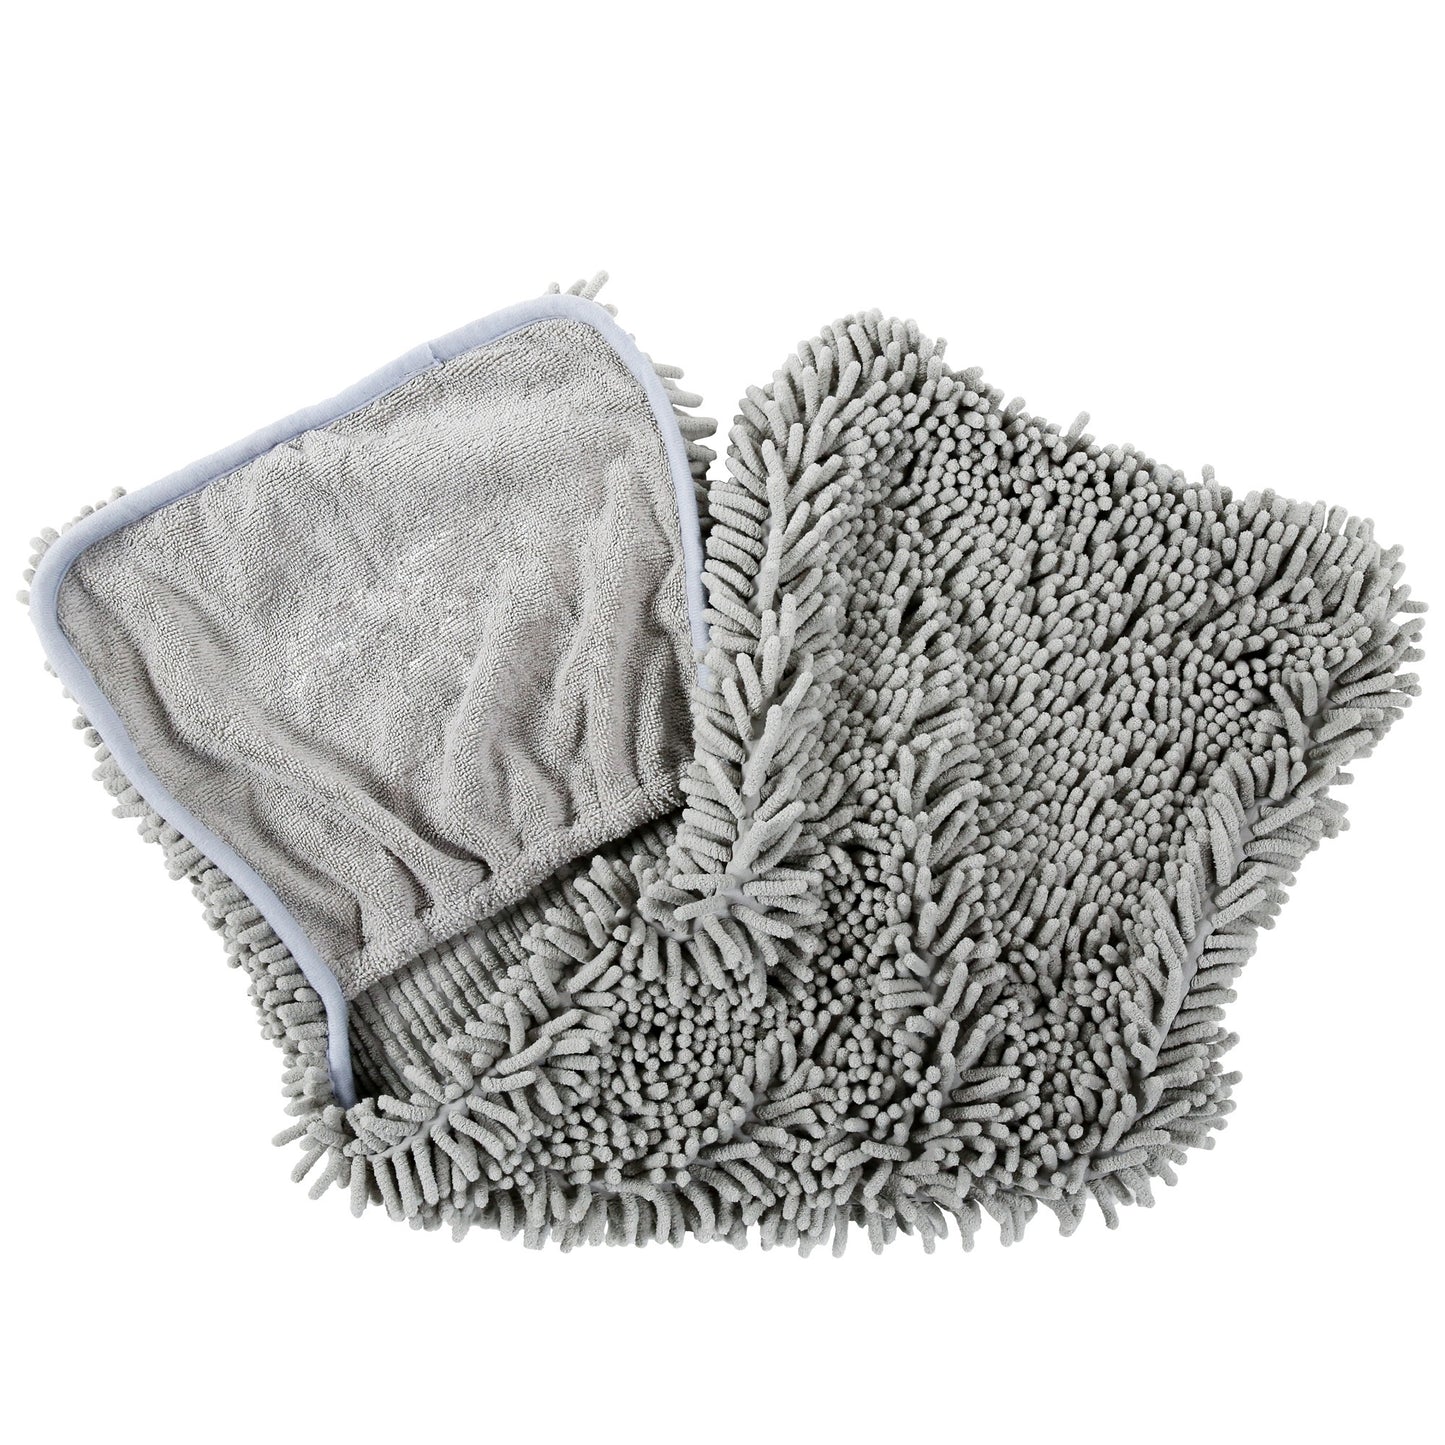 Absorbent Dog Towel, Extra Large (35"x15") Quick Drying Dog Bath Towel with Hand Pockets, Microfiber Shammy Pet Towel for Dog and Cat, Machine Washable (Grey)